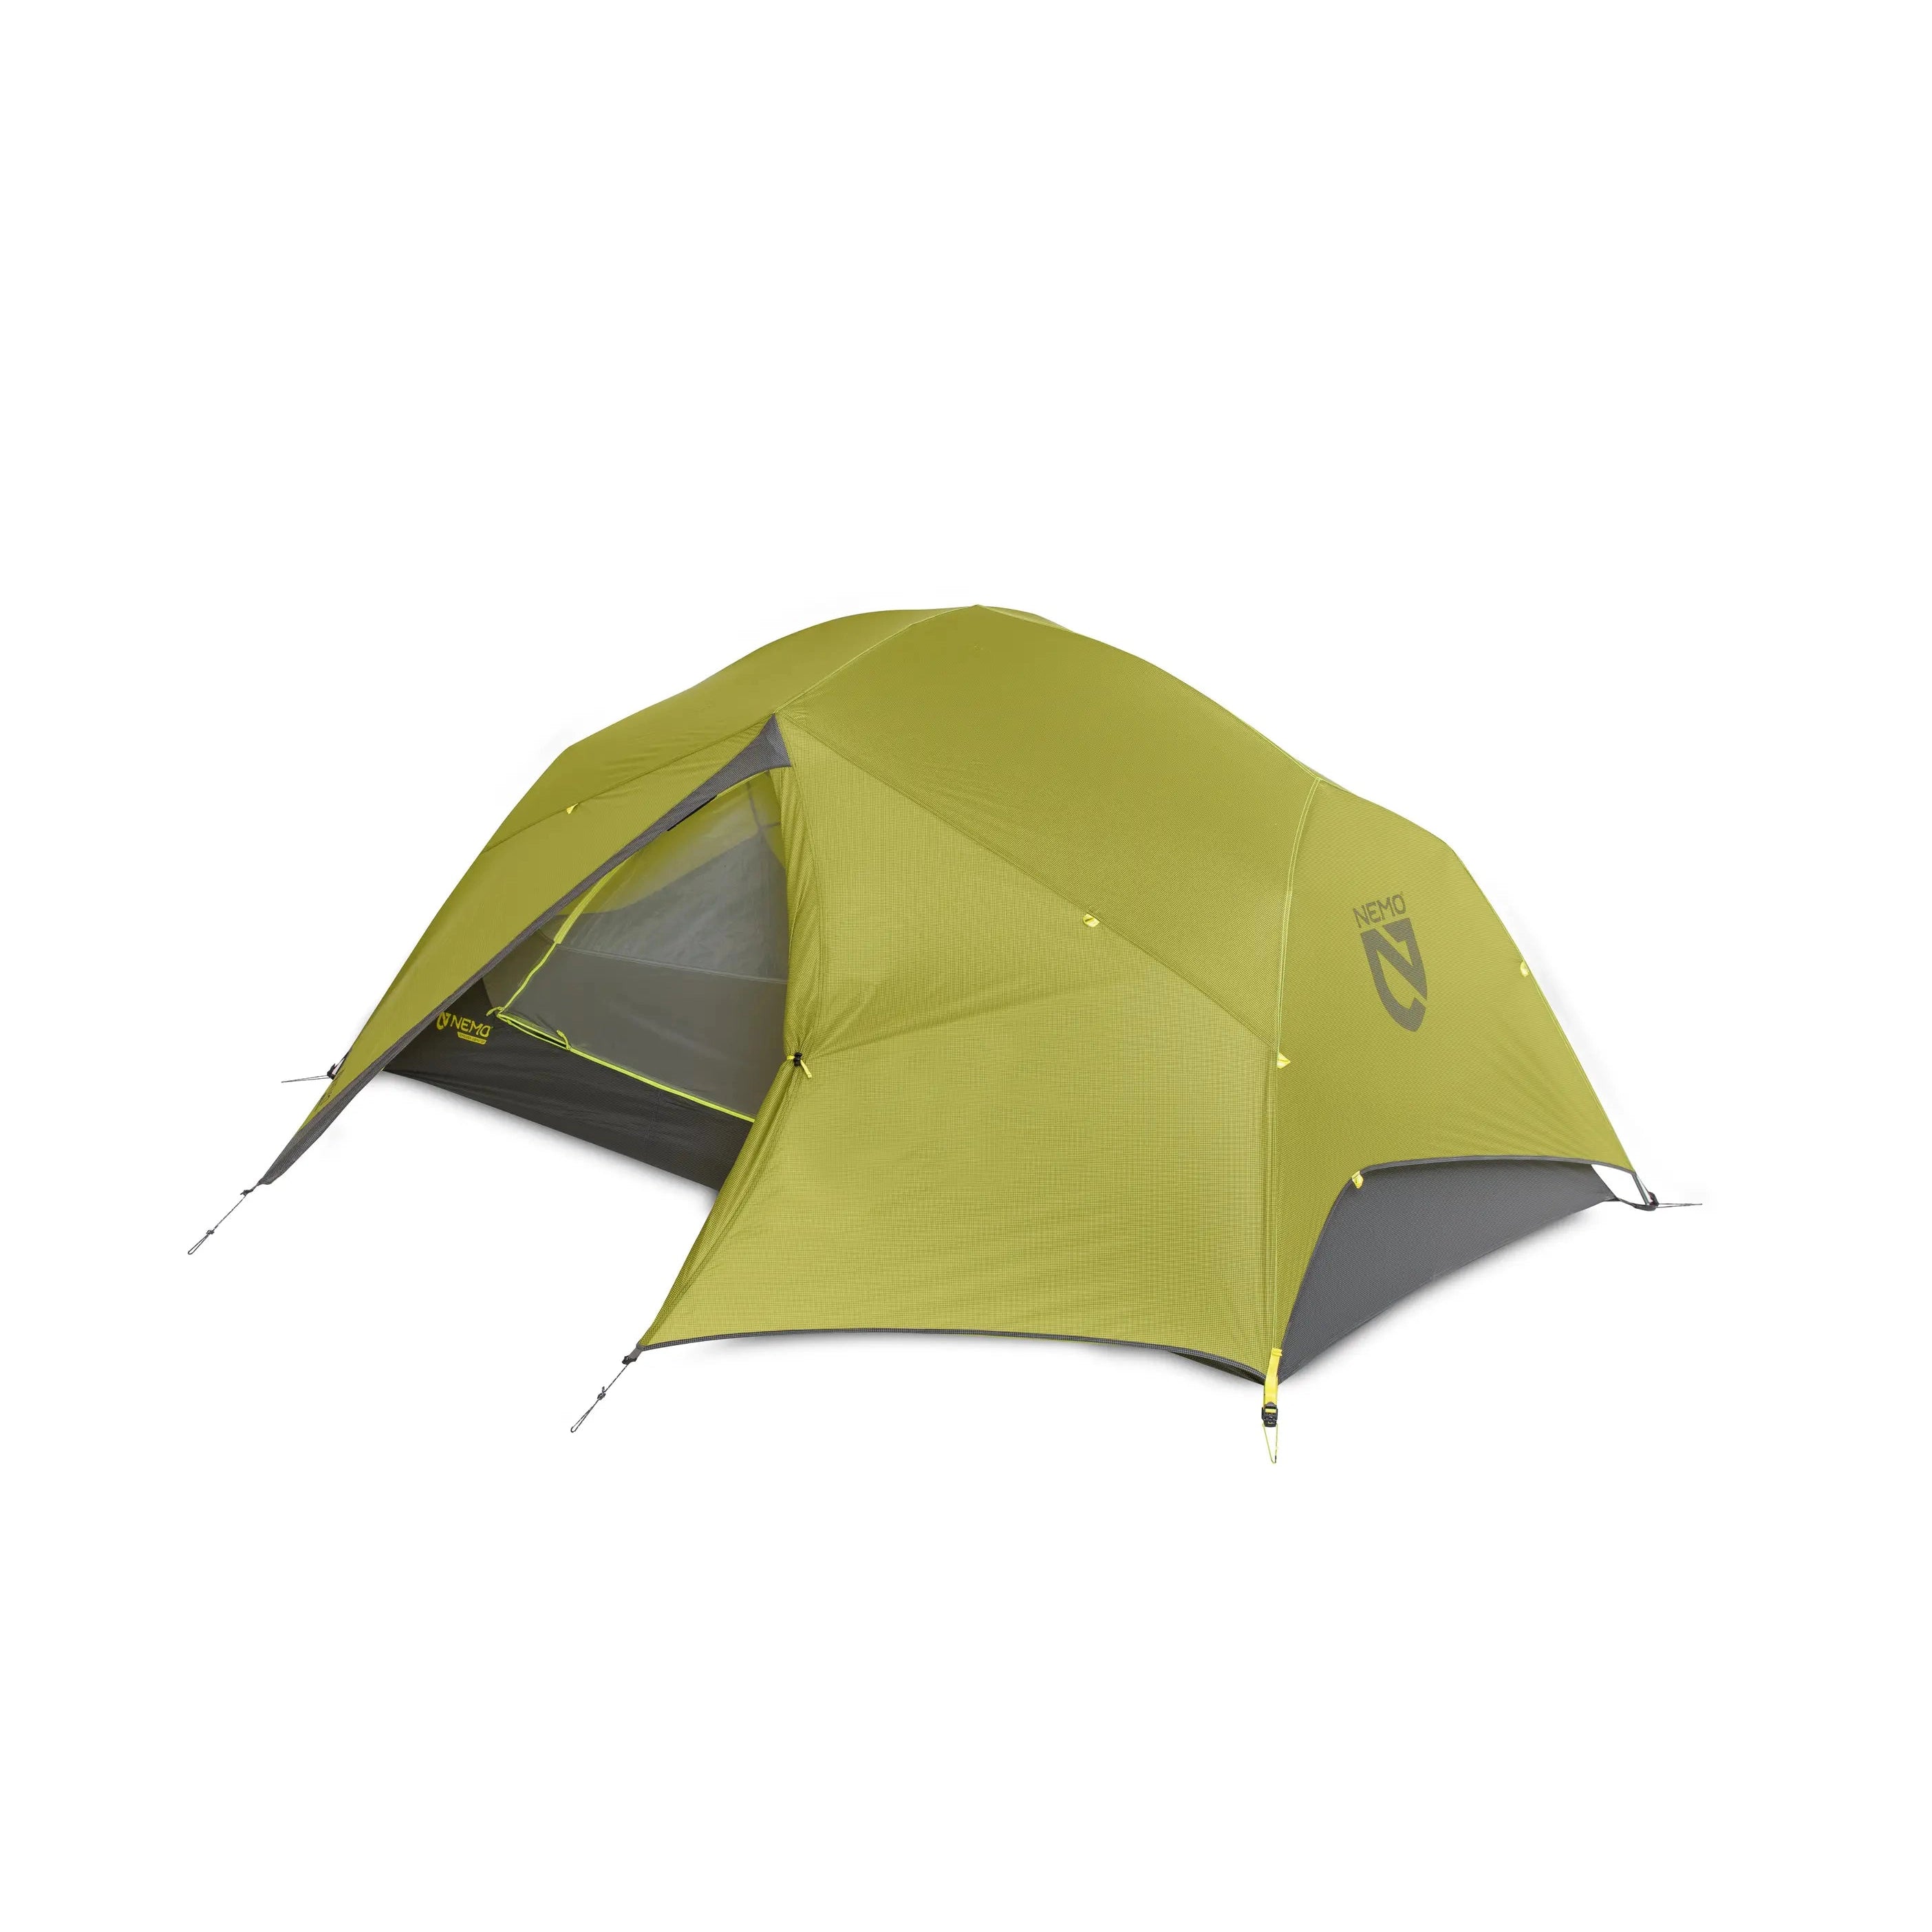 NEMO Dagger OSMO Lightweight Backpacking Tent 2 Person